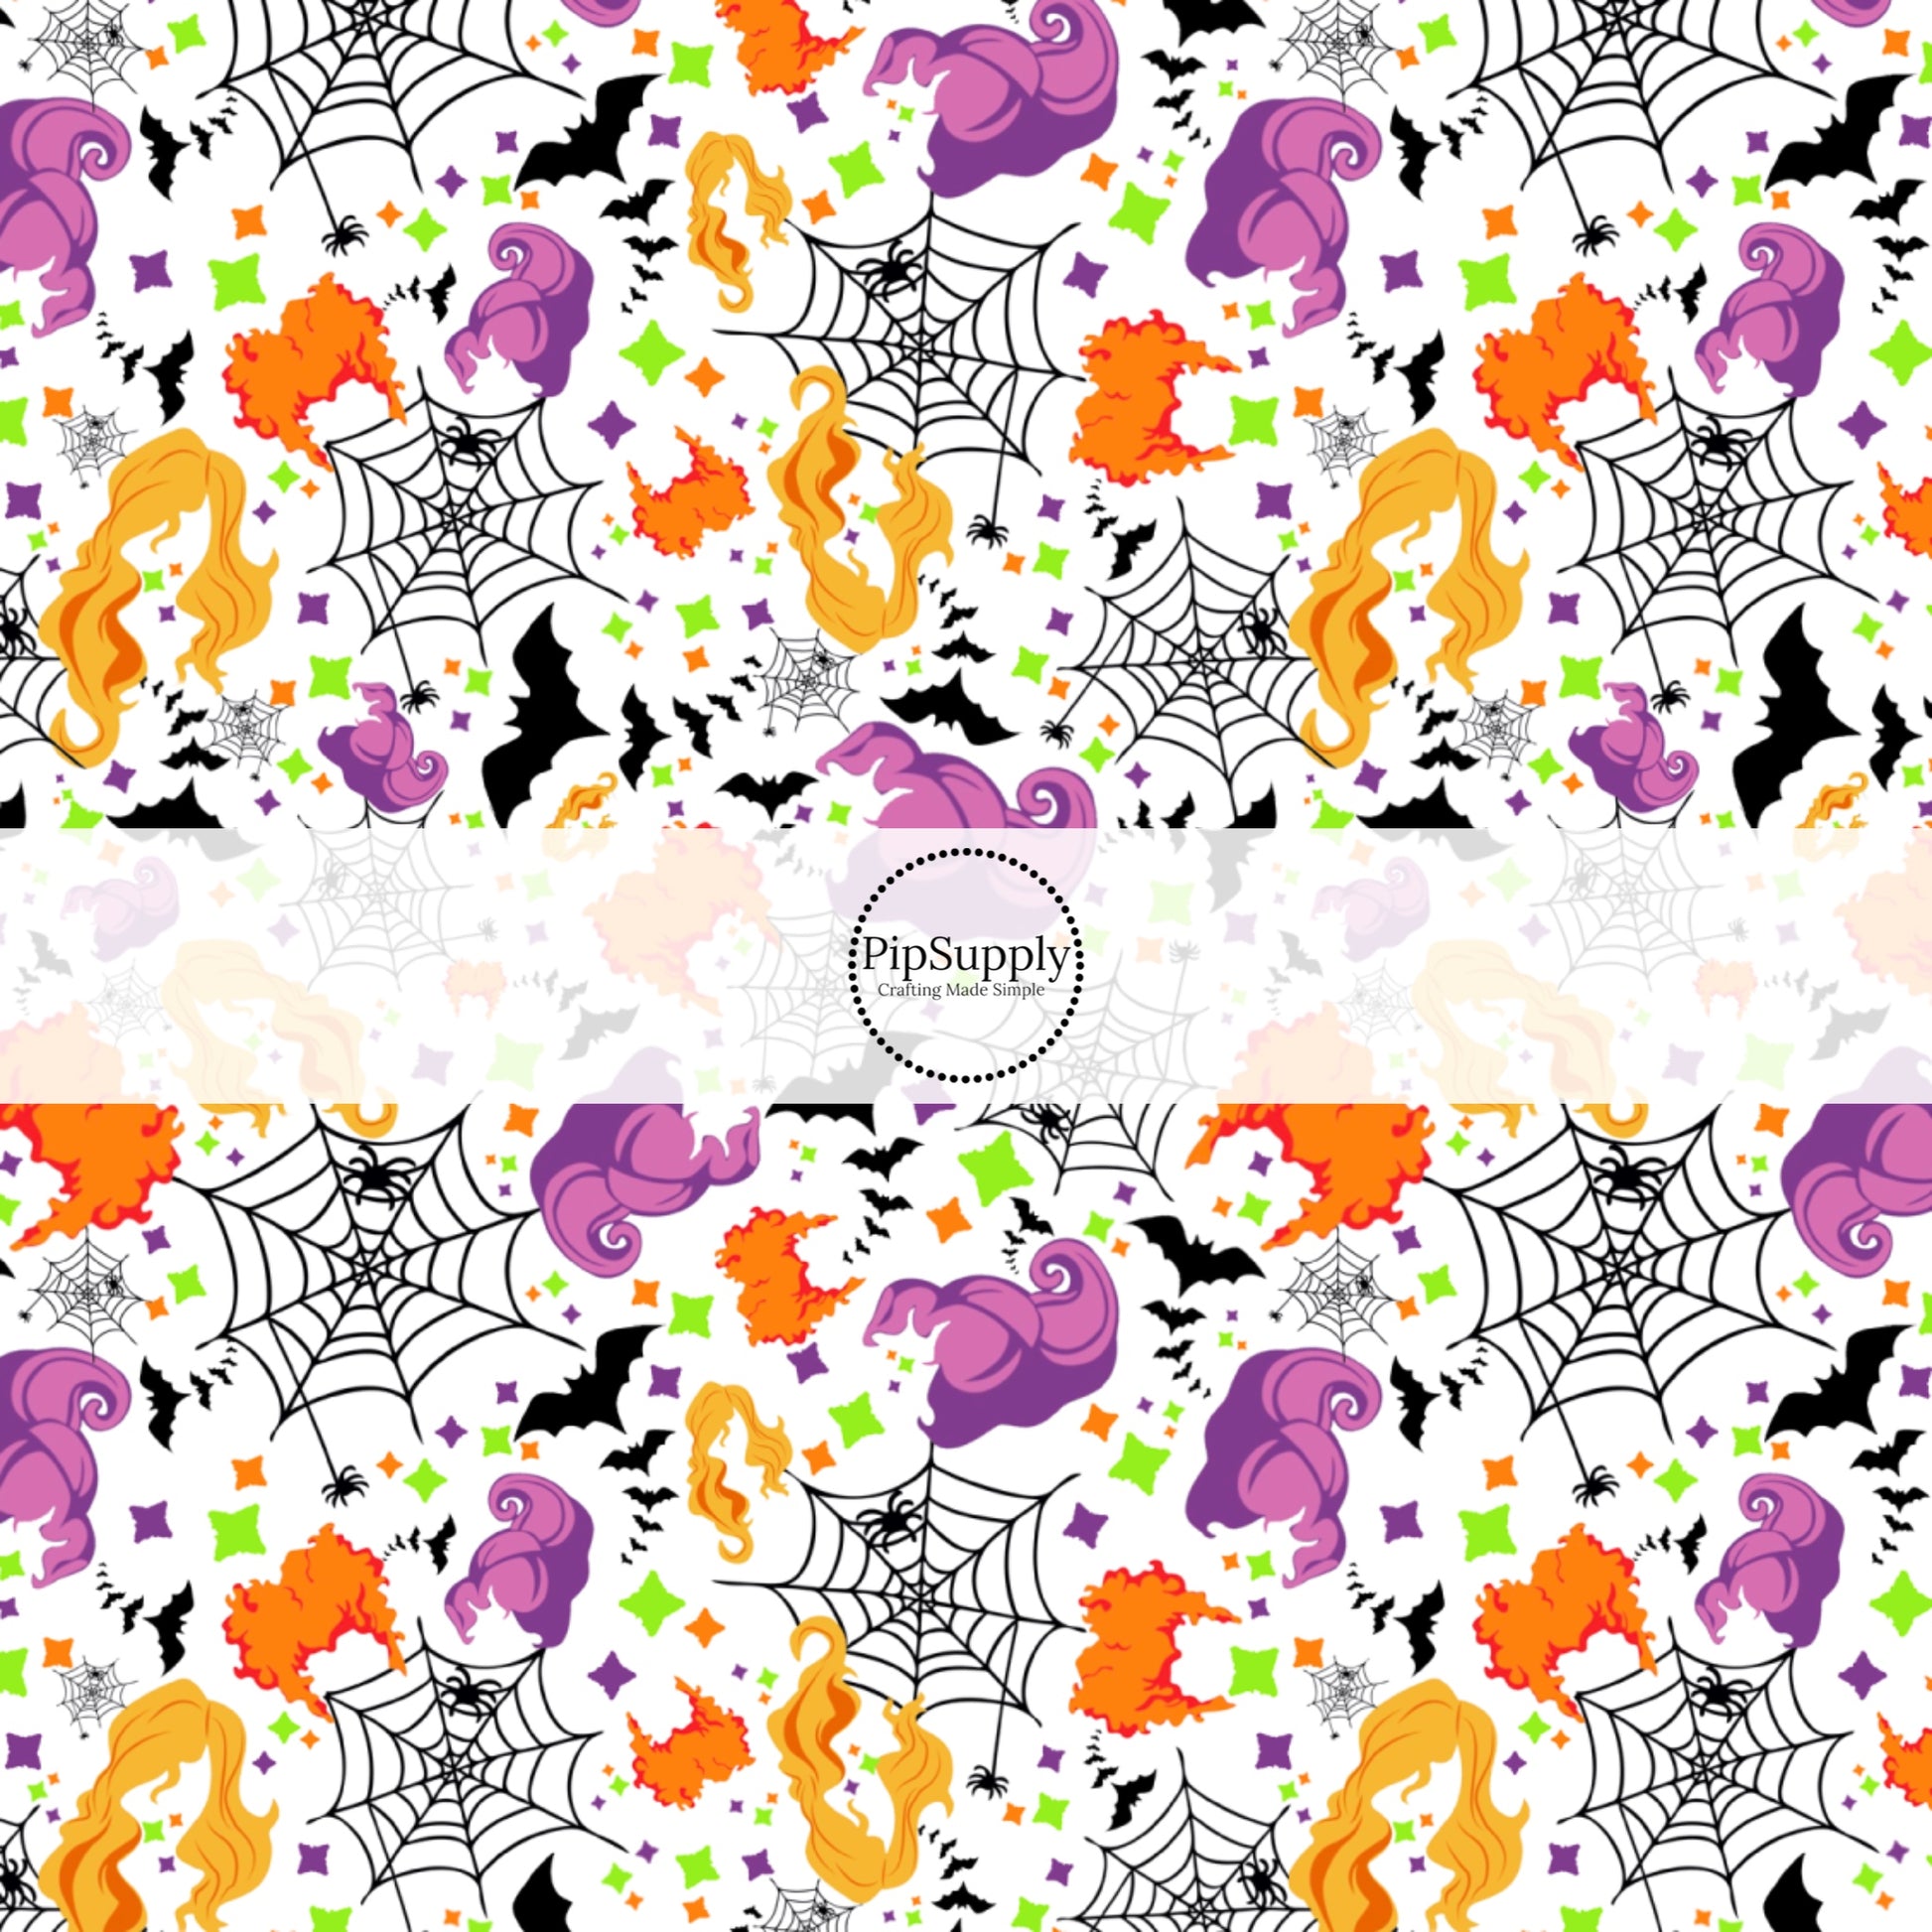 White fabric by the yard with spiderwebs, witches, and colorful stars.